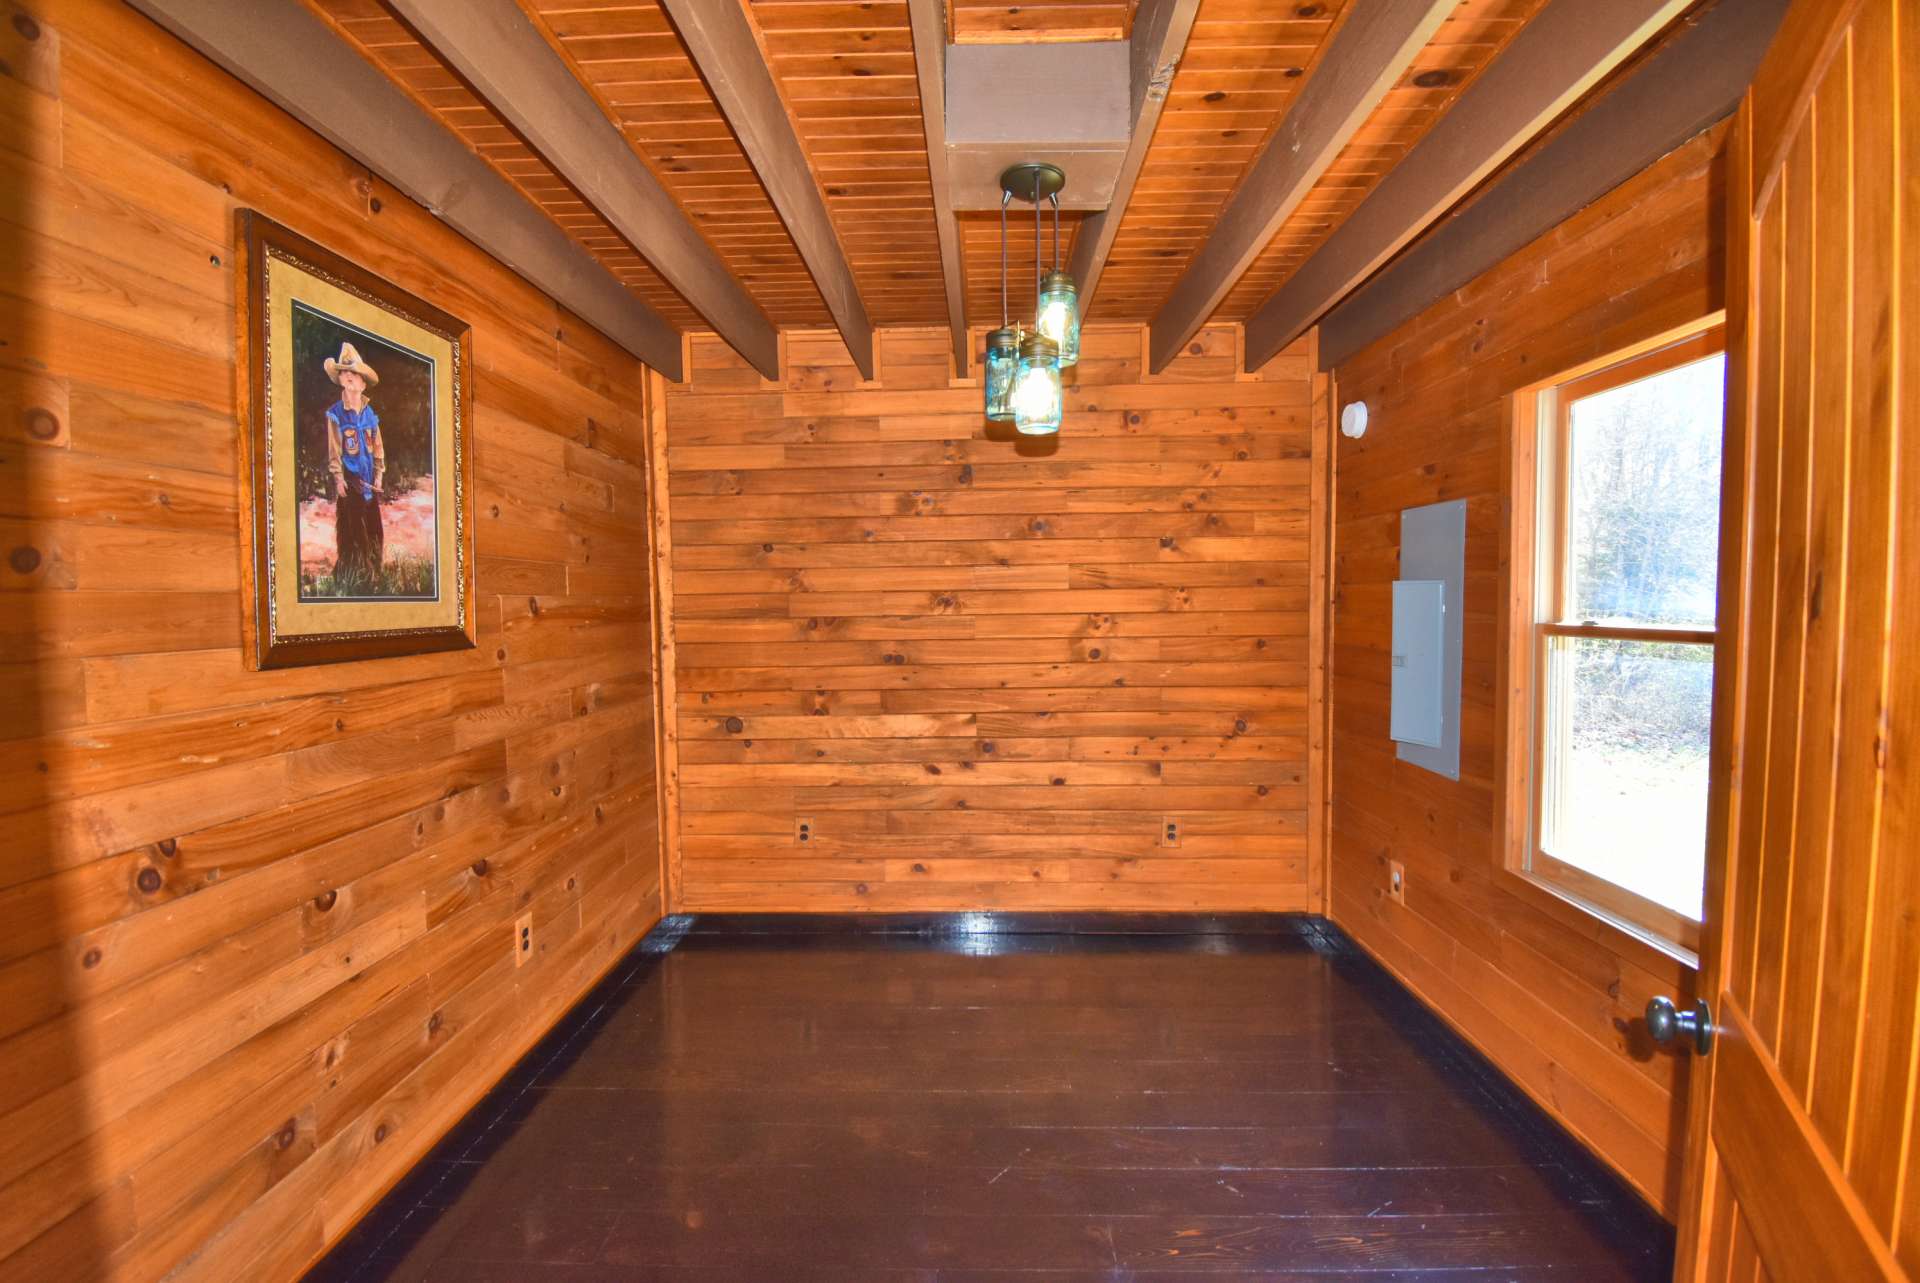 This is the second bedroom on the main level. This cabin was built as a vacation rental investment, so the bedrooms do not have closets.